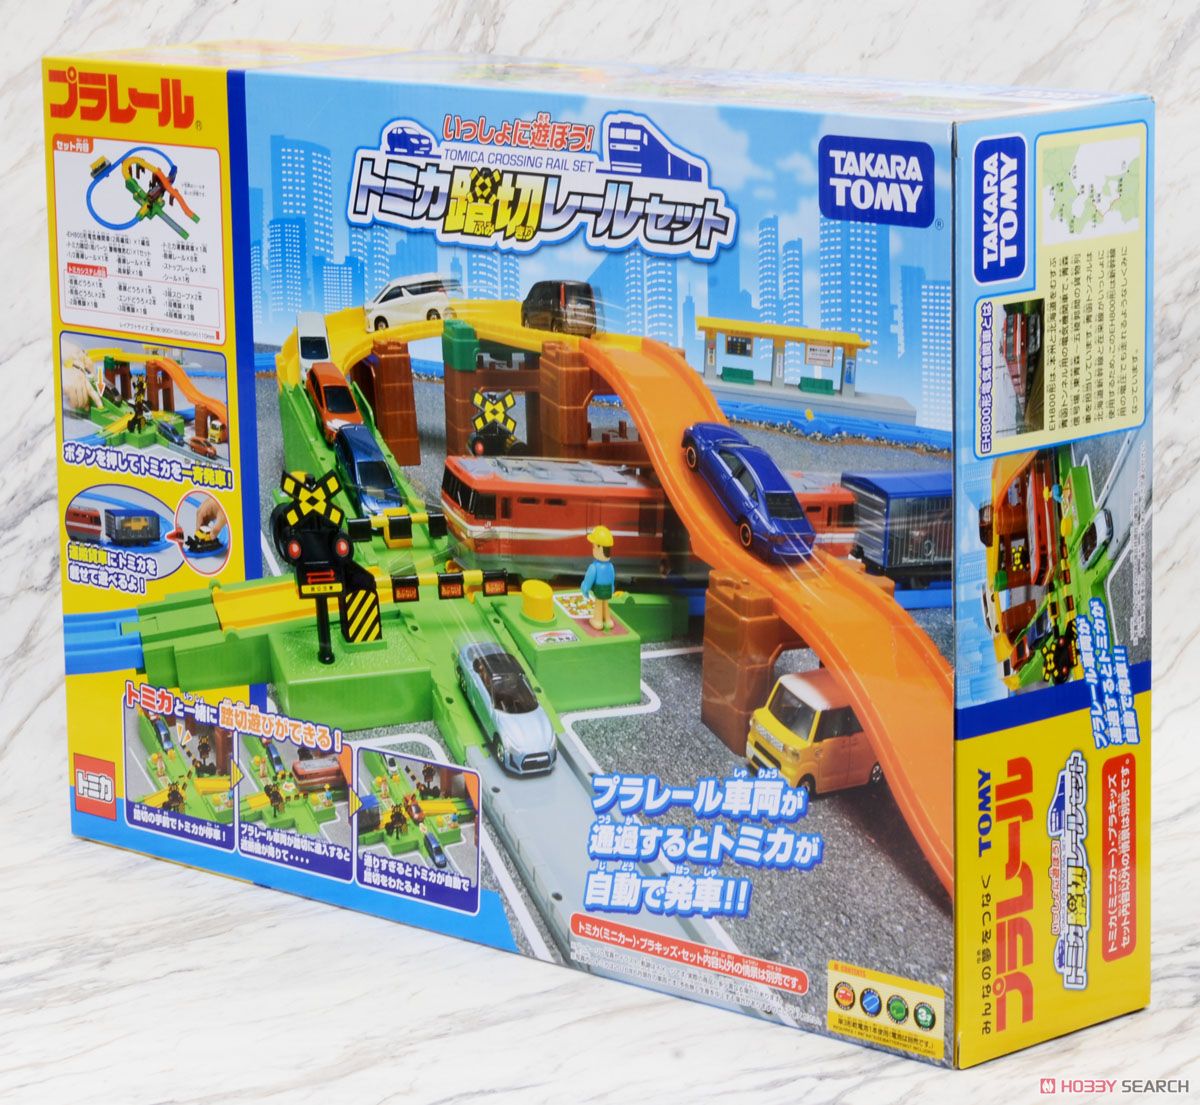 Let`s Play Together! Tomica Crossing Rail Set (Plarail) Package1